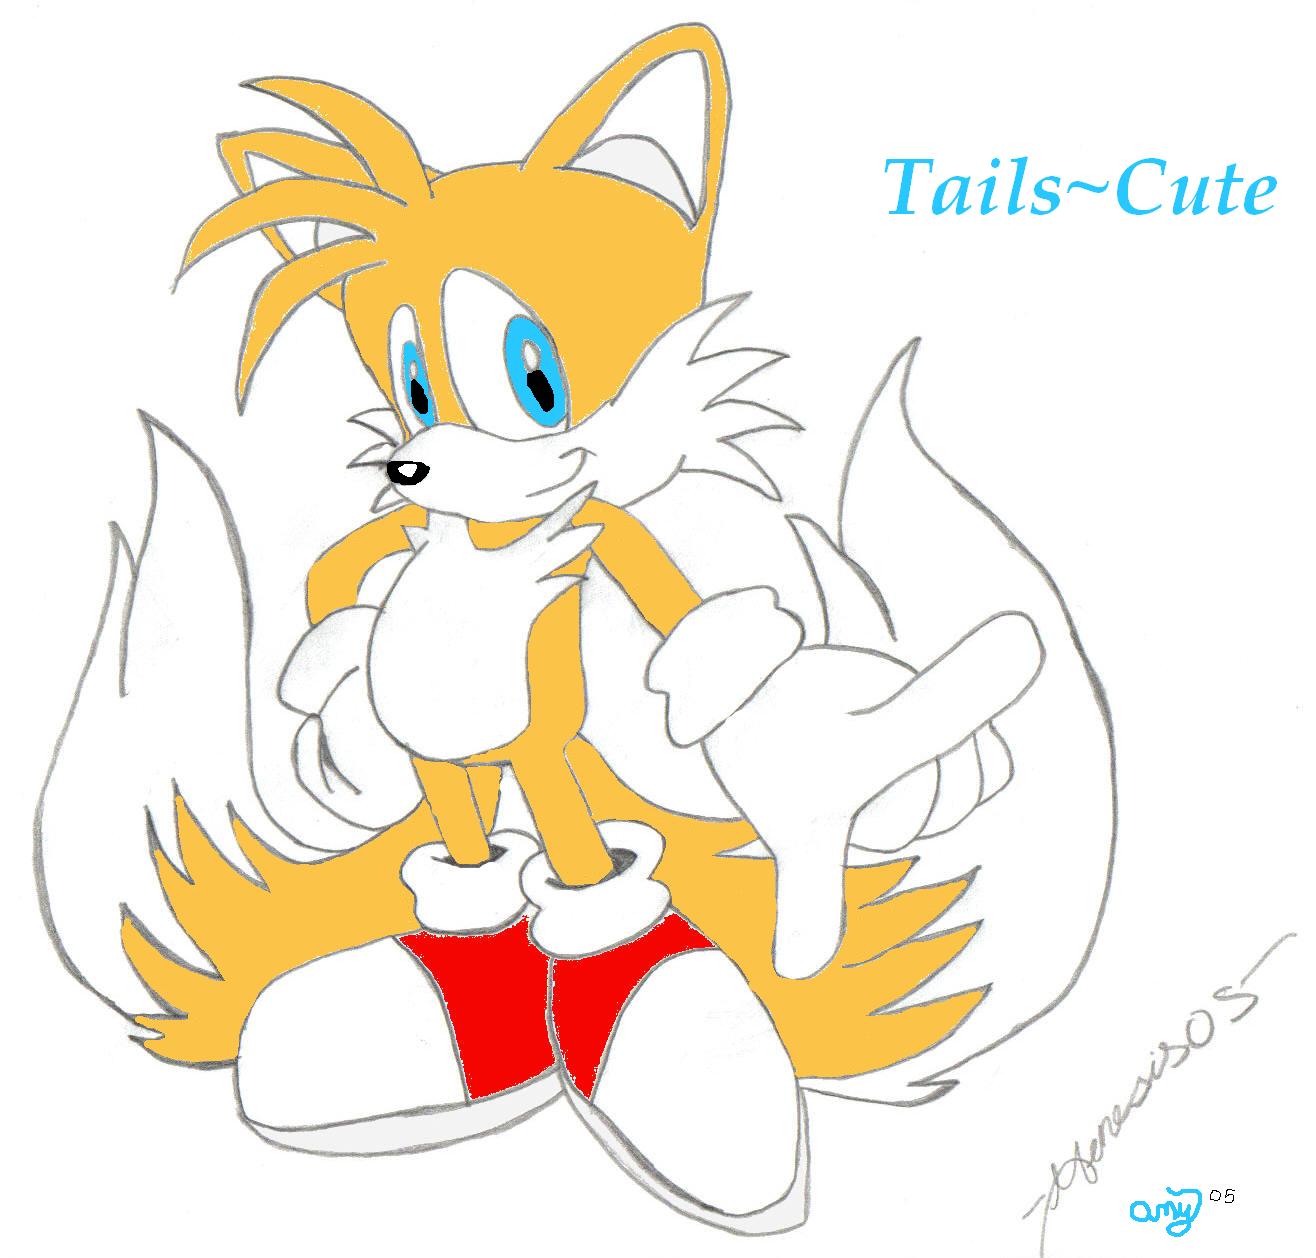 Tails~Cute by Amyfan2004